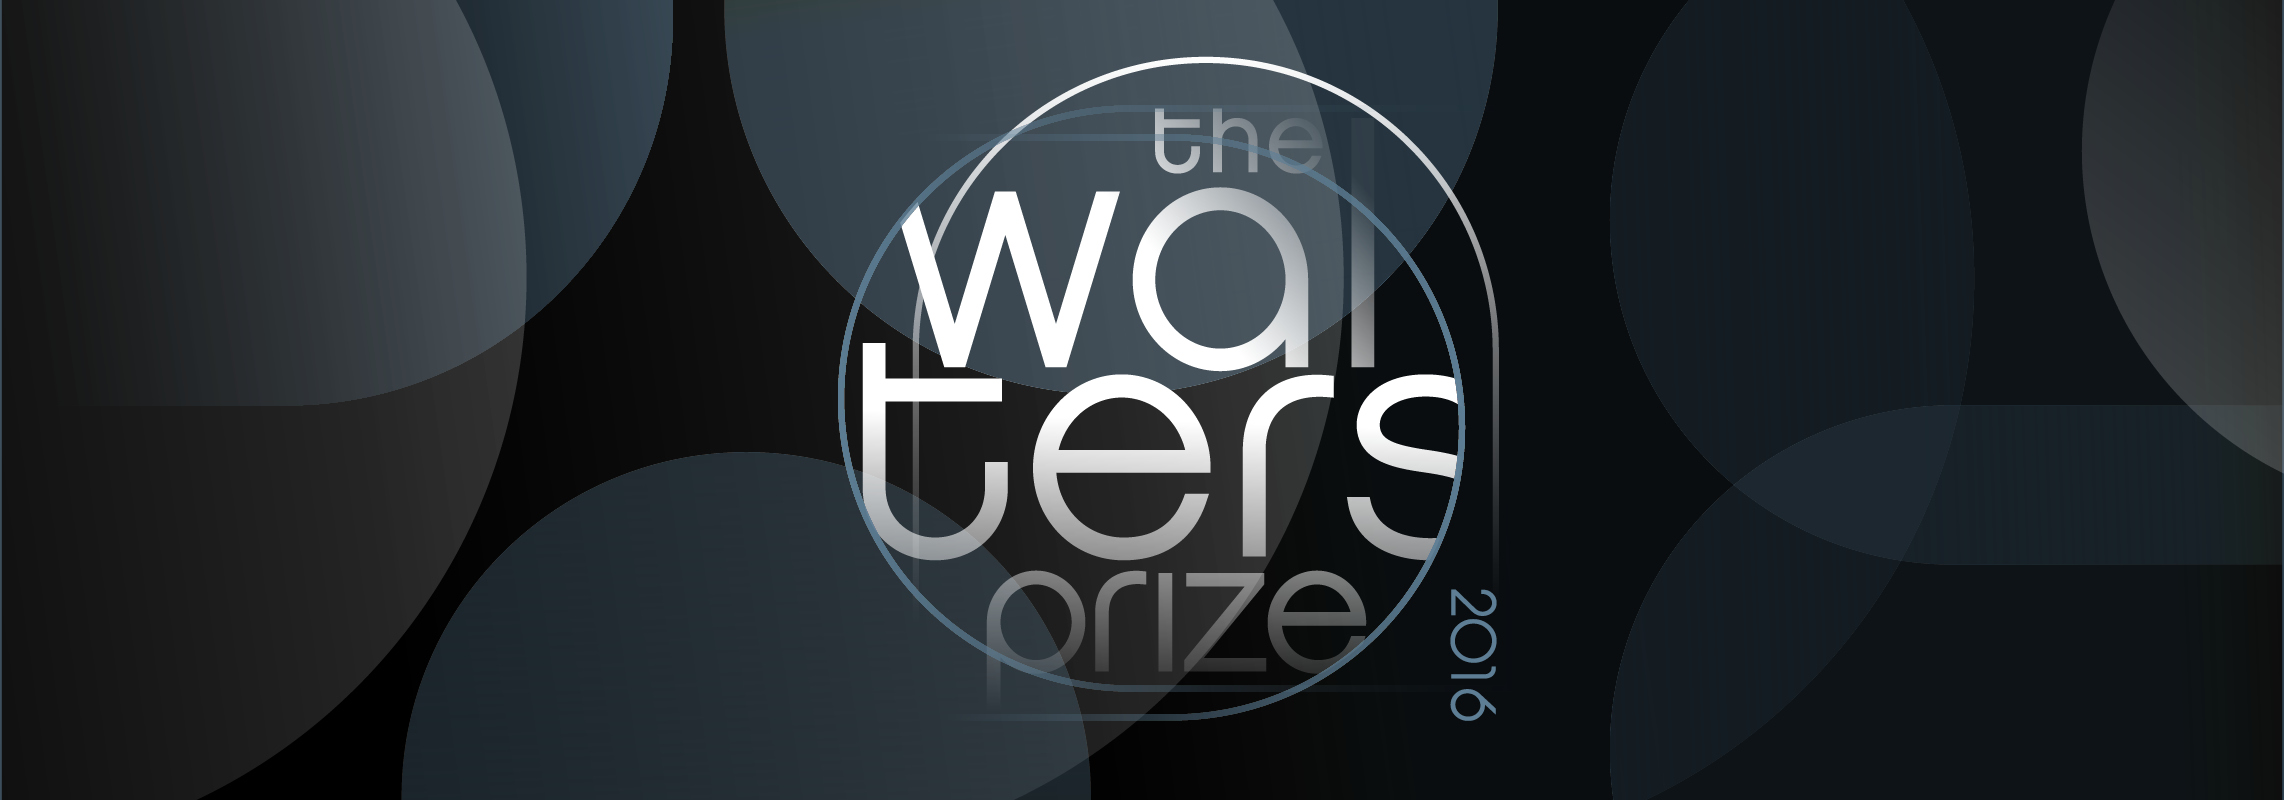 The Walters Prize 2016